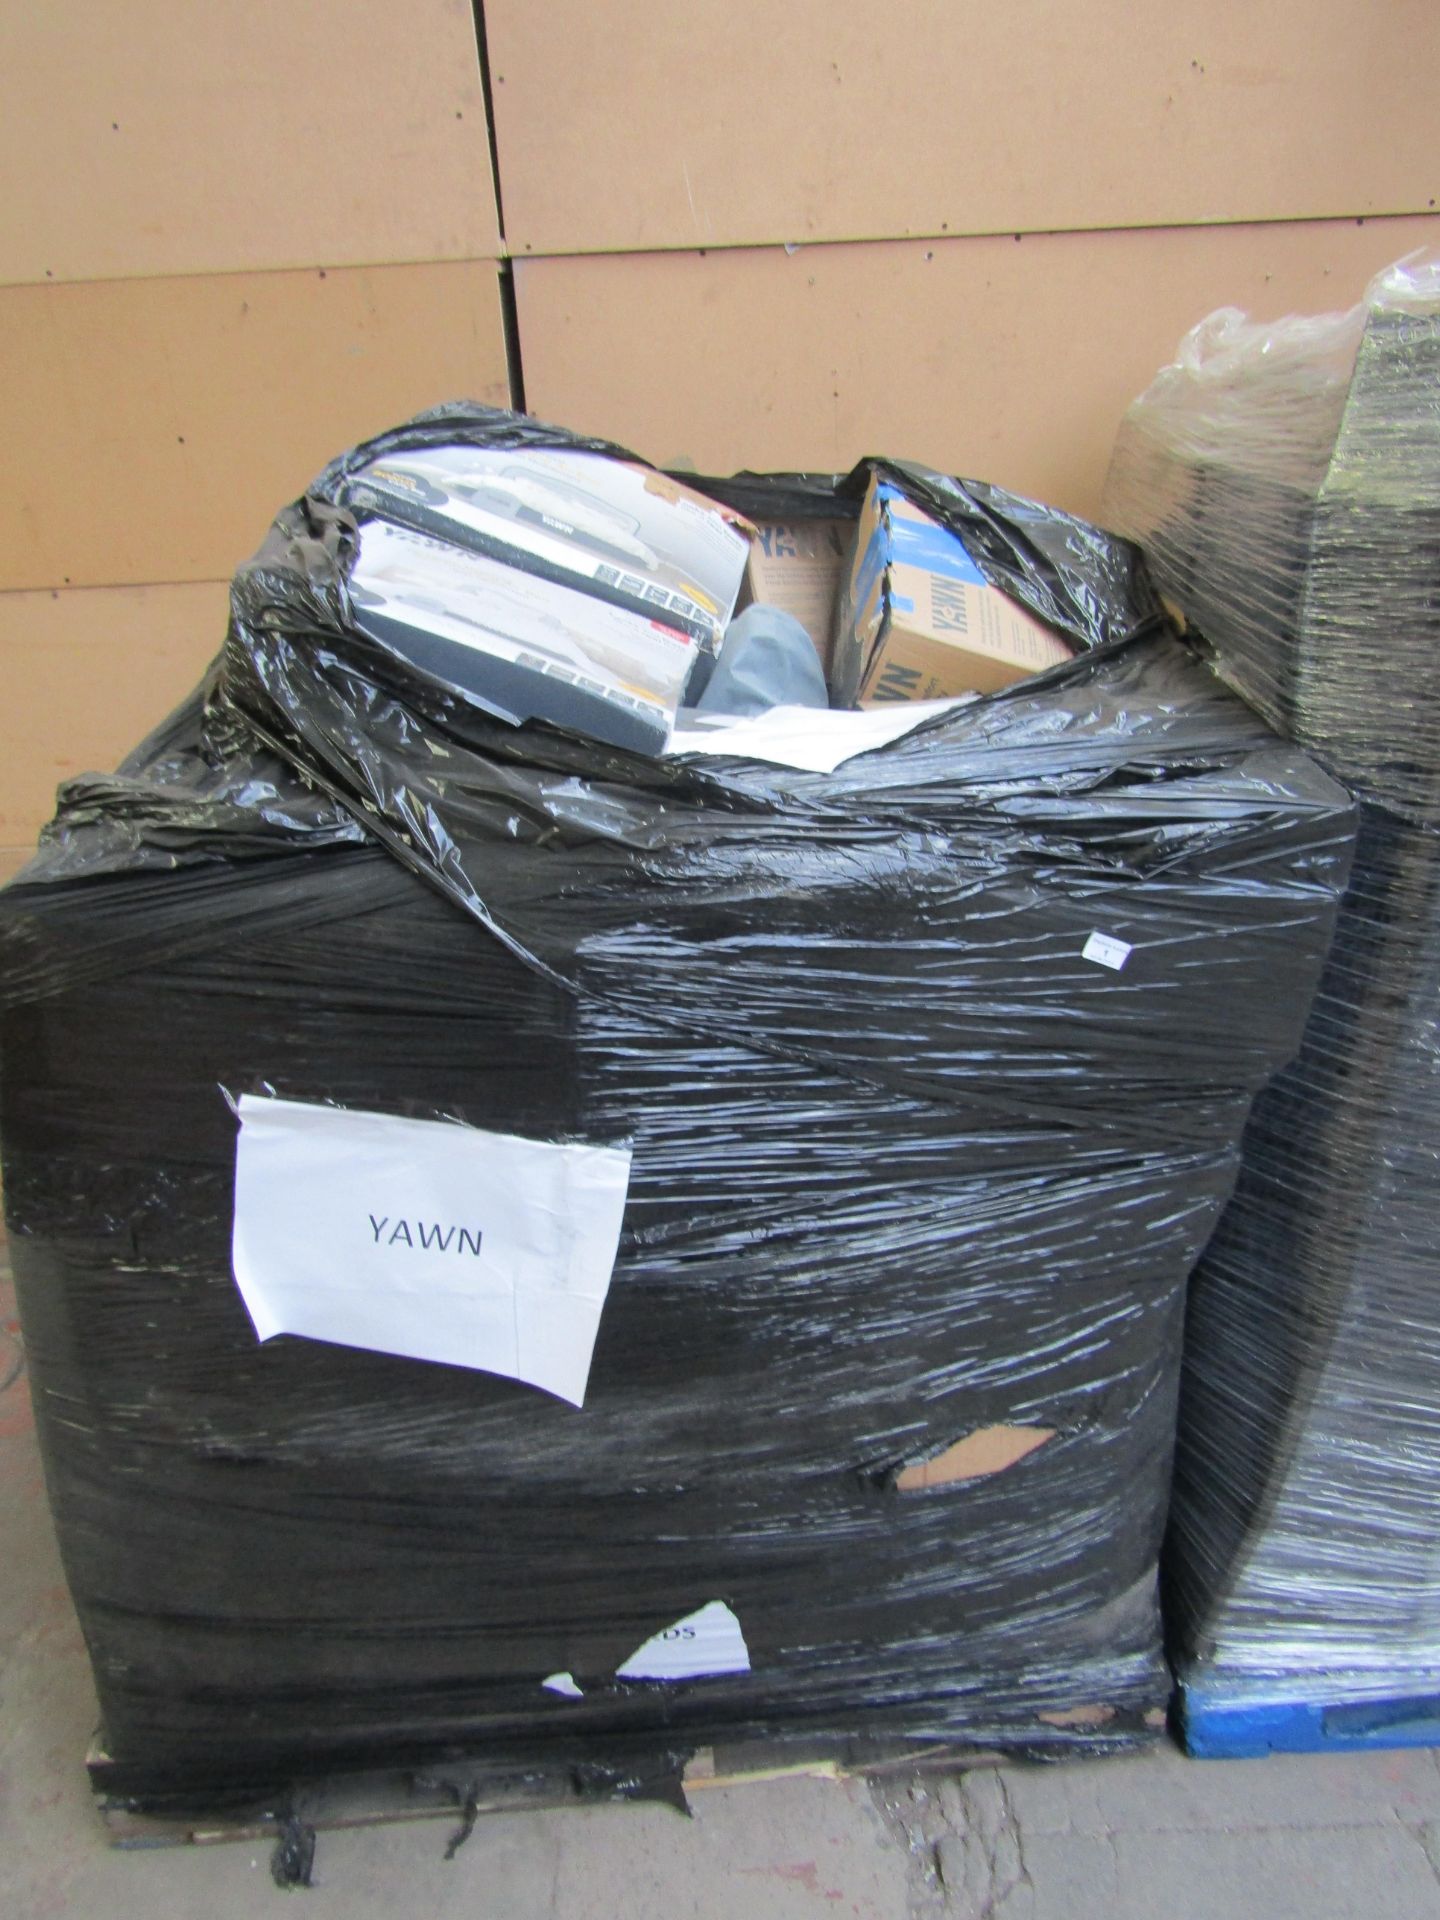 | 1X | PALLET OF APPROX 30-35 VARIOUS SIZED AIR BEDS, ALL RAW CUSTOMER RETURNS | UNCHECKED | NO